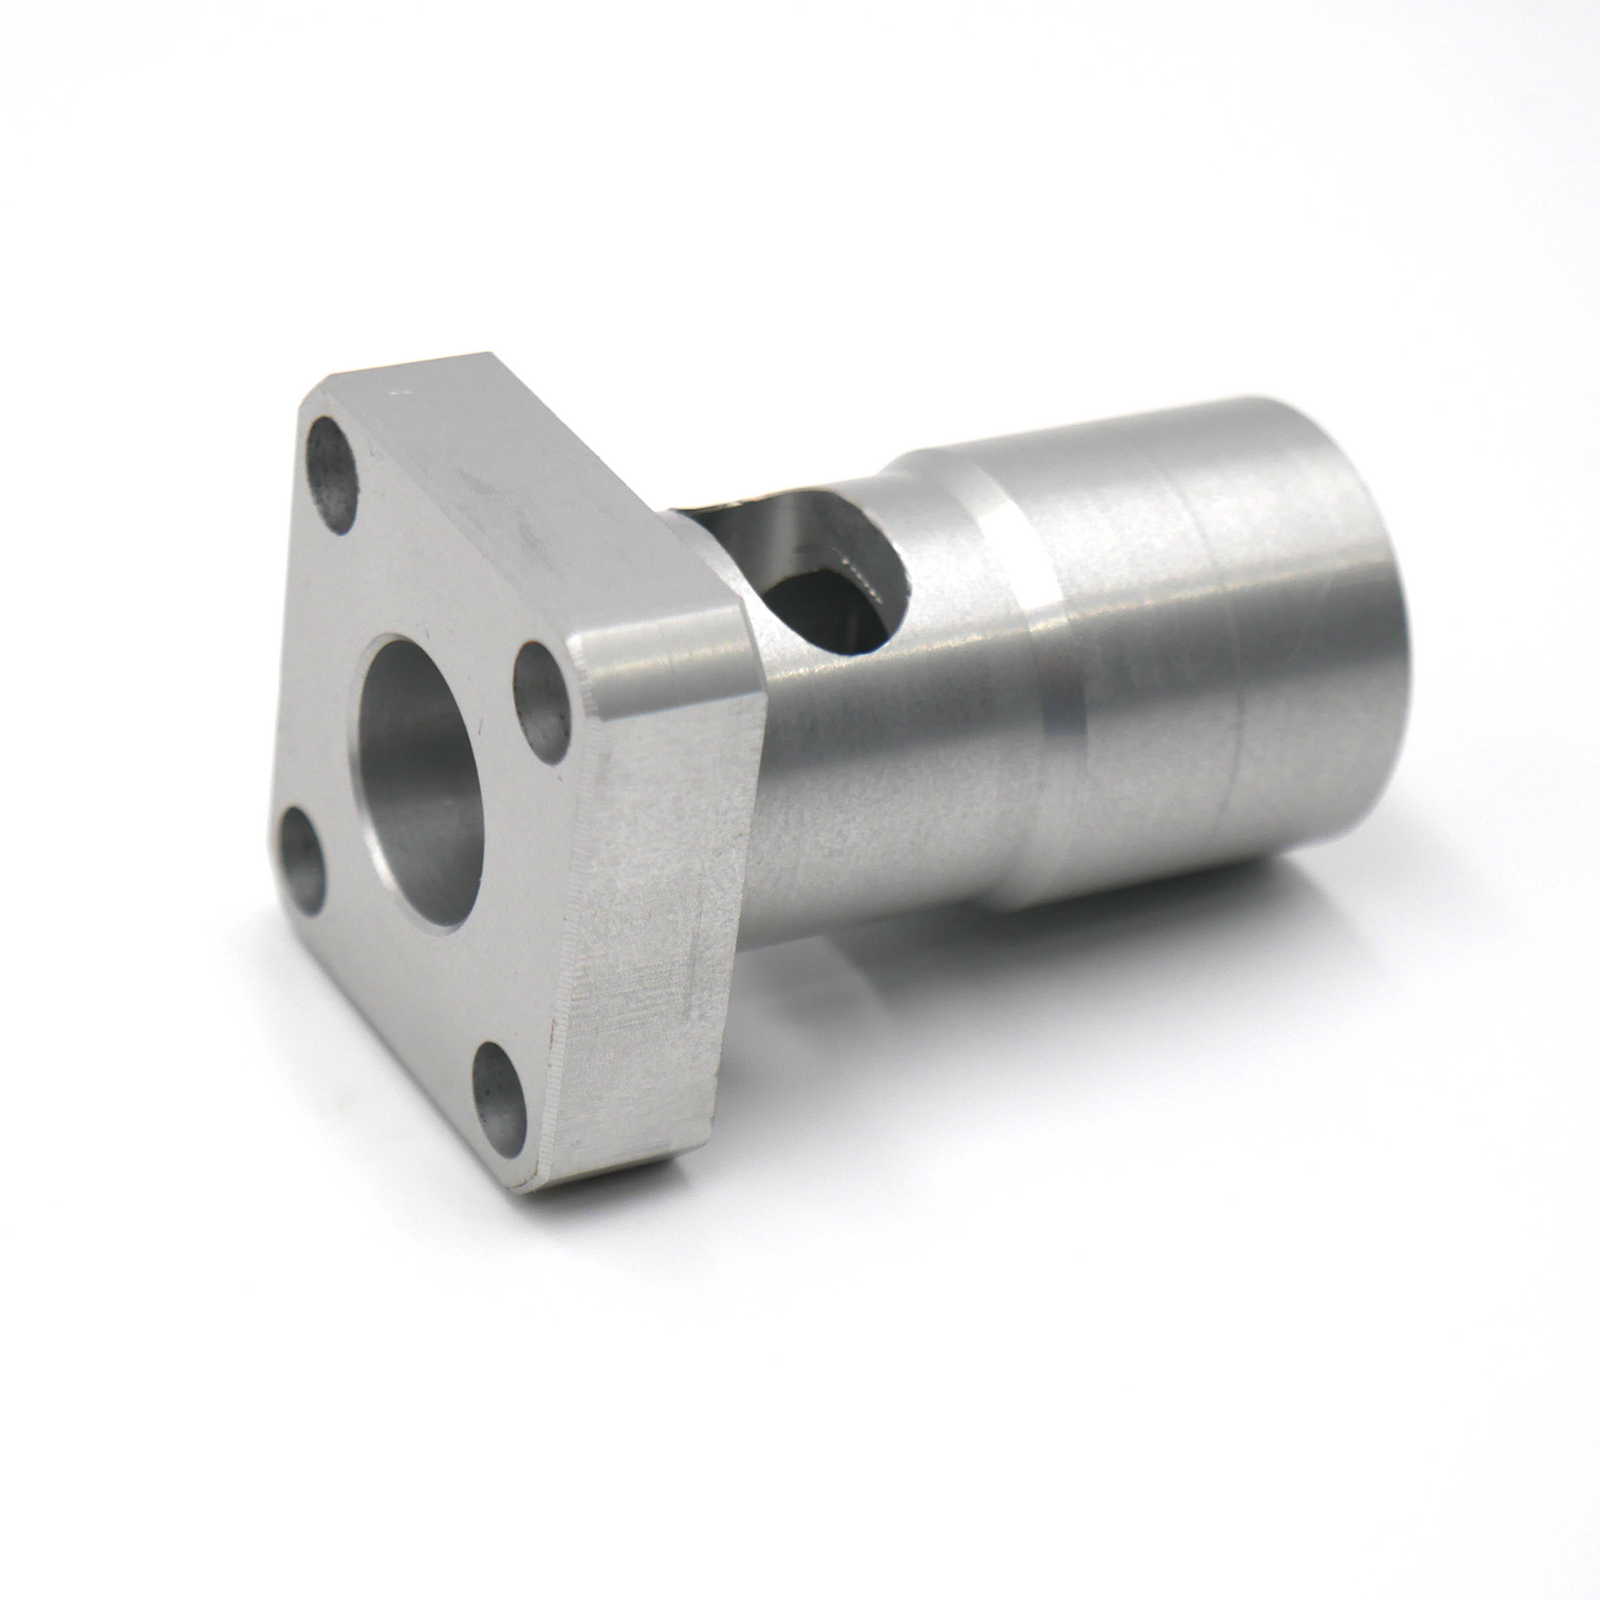 Pneumatic cylinder mount of dispensing nozzle